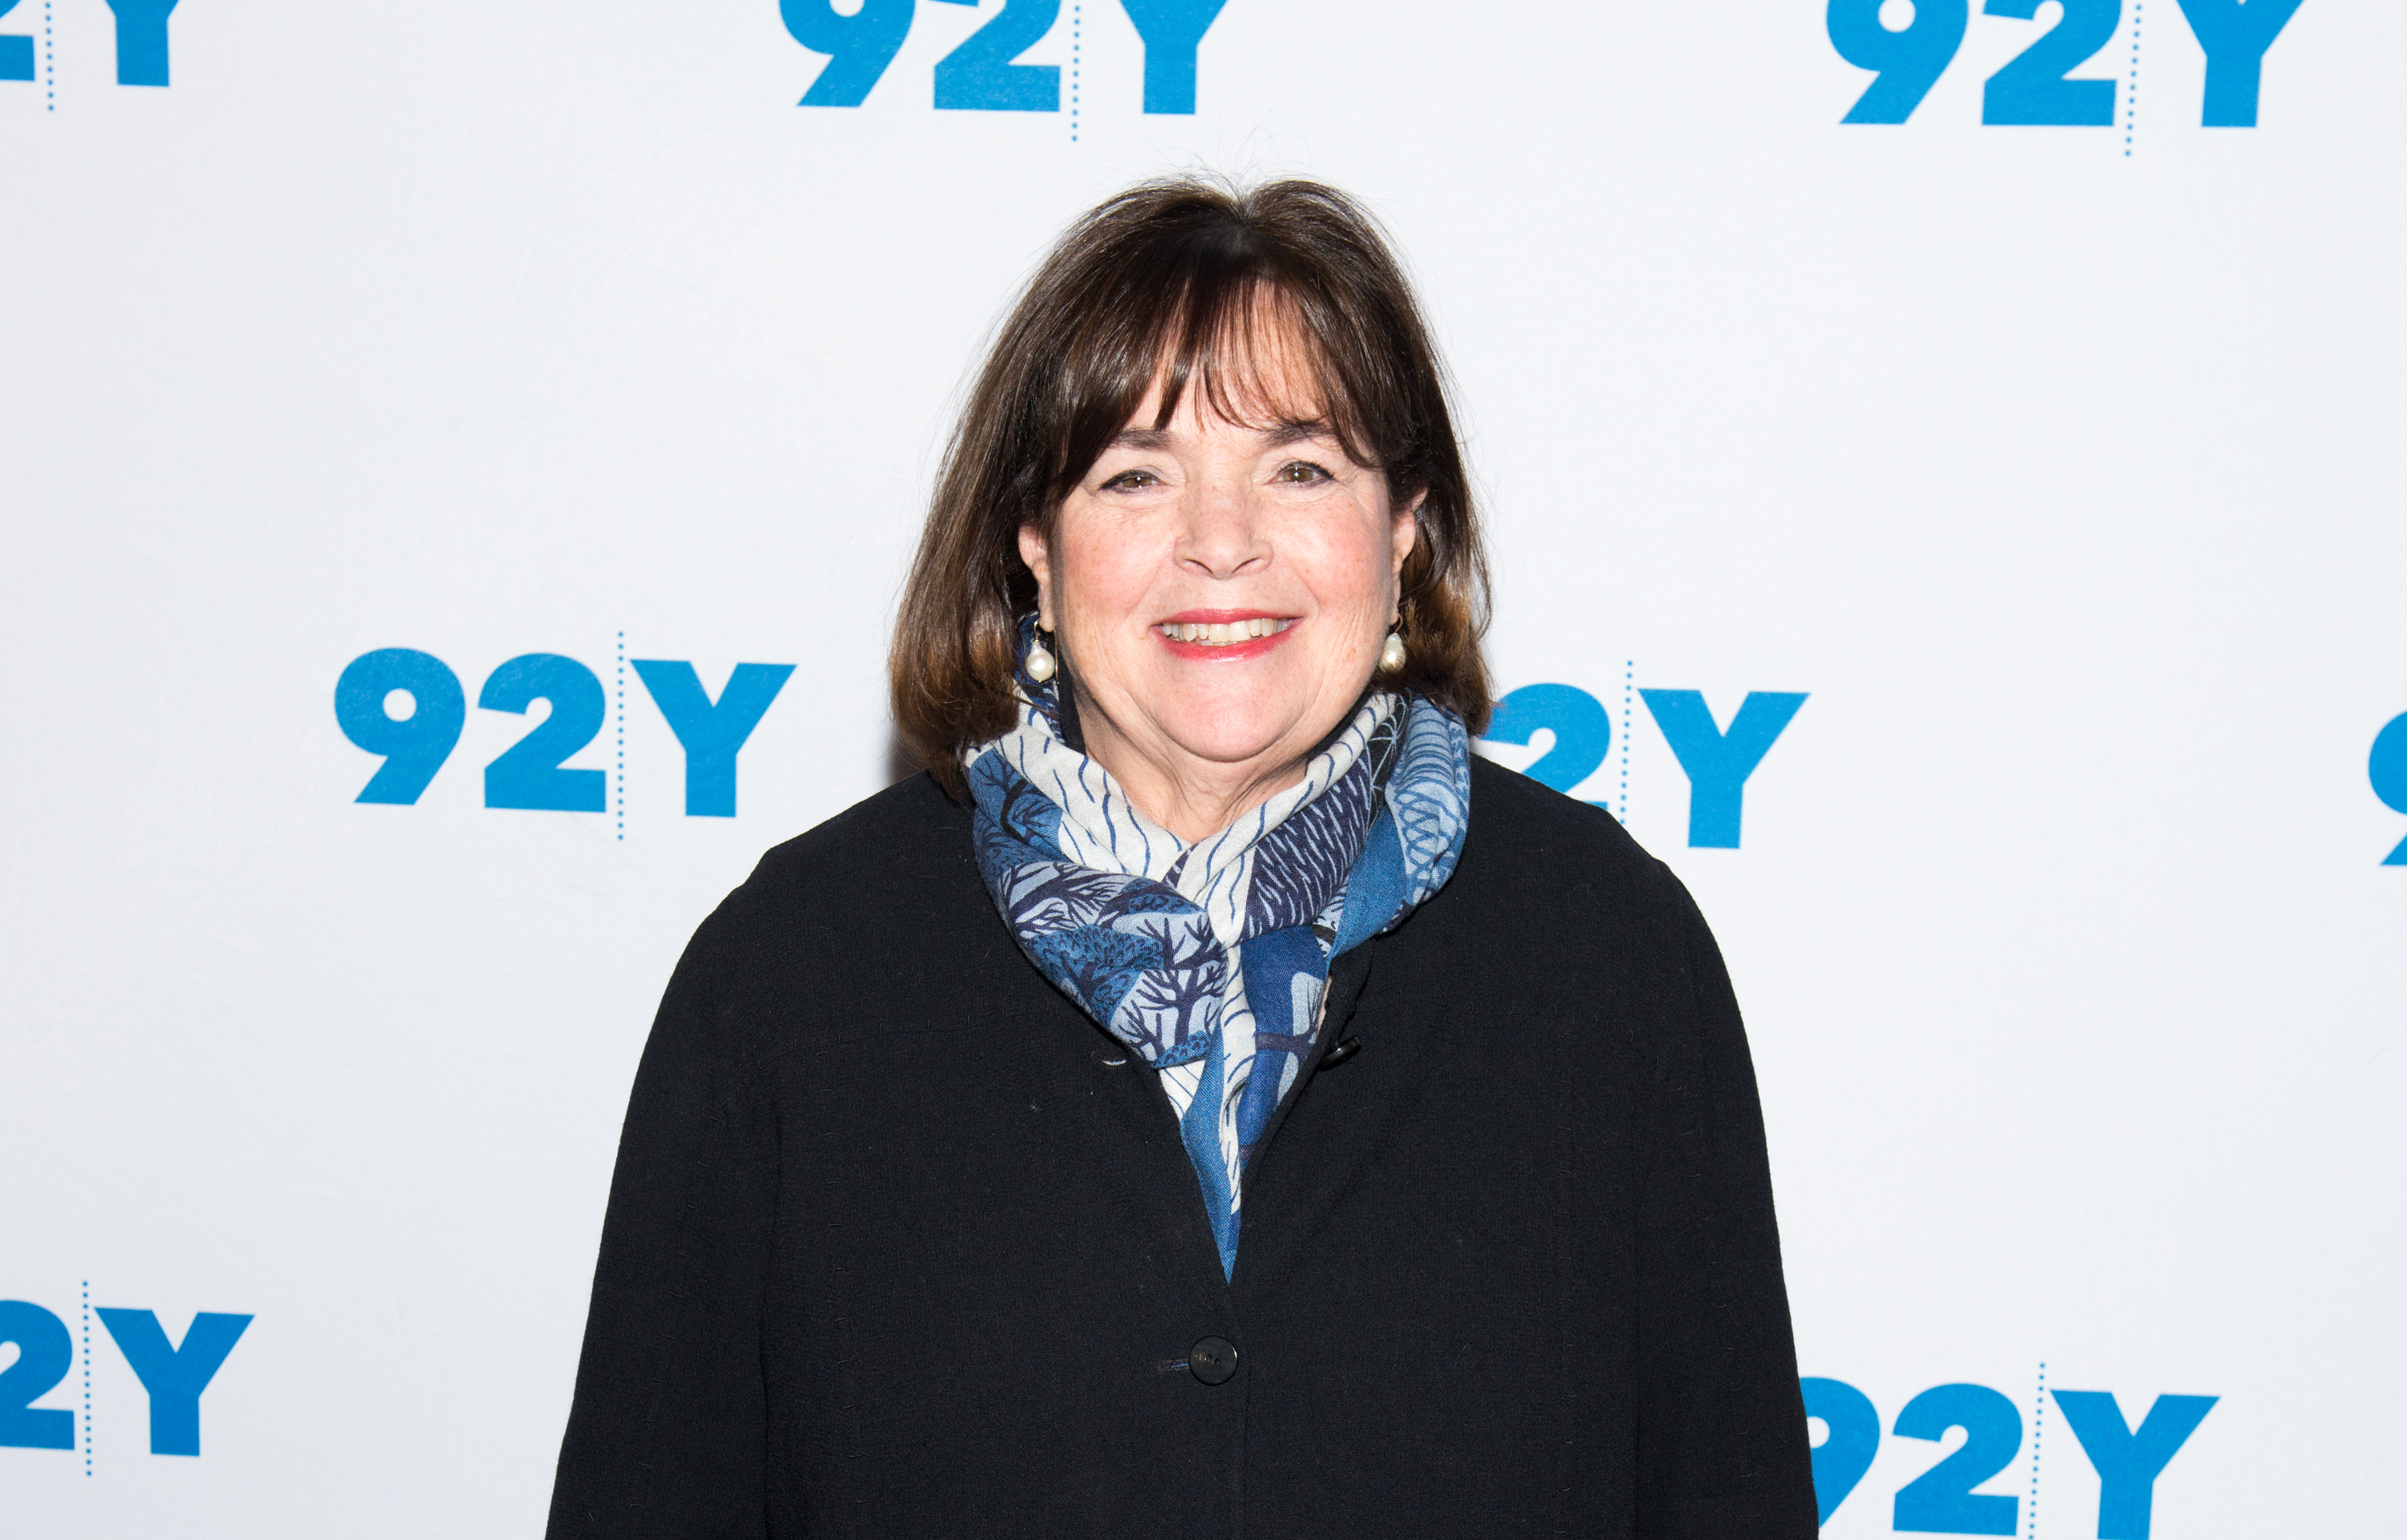 Ina Garten poses for photographers